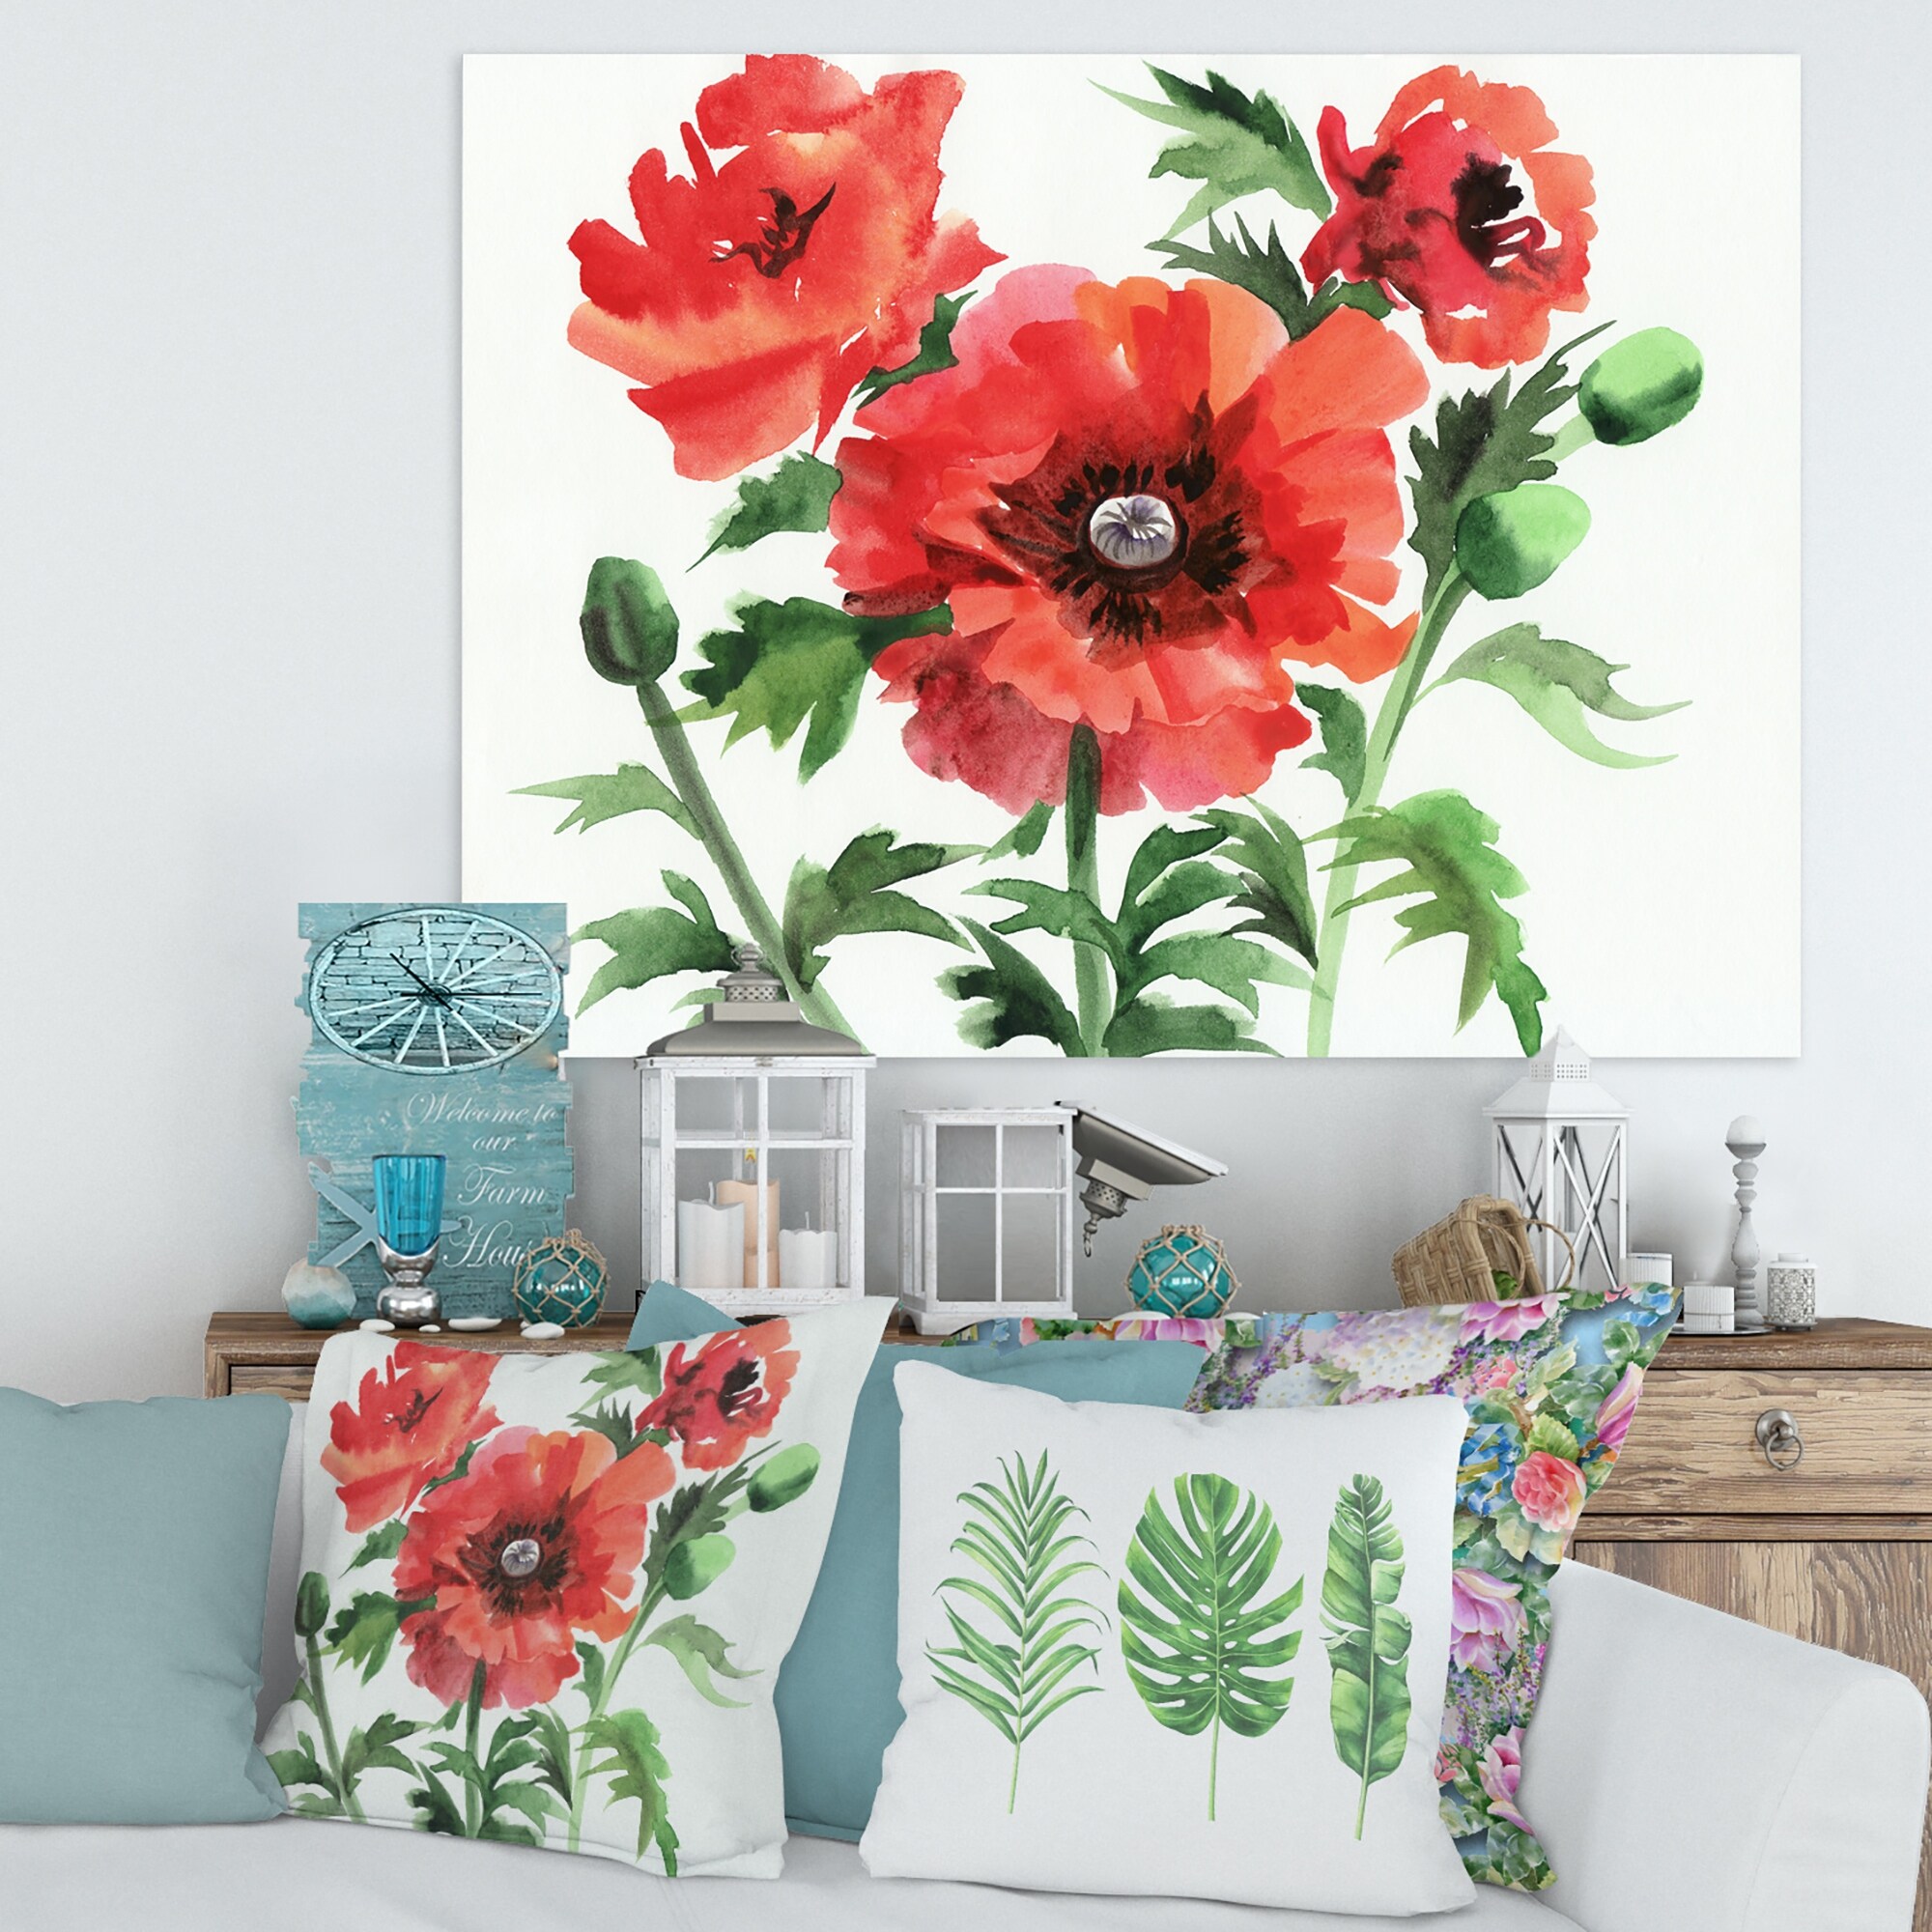 https://ak1.ostkcdn.com/images/products/is/images/direct/7b22973536ff507cffef322ae2a9646d8c829f5a/Designart-%27Vintage-Red-Poppies-II%27-Traditional-Canvas-Wall-Art-Print.jpg